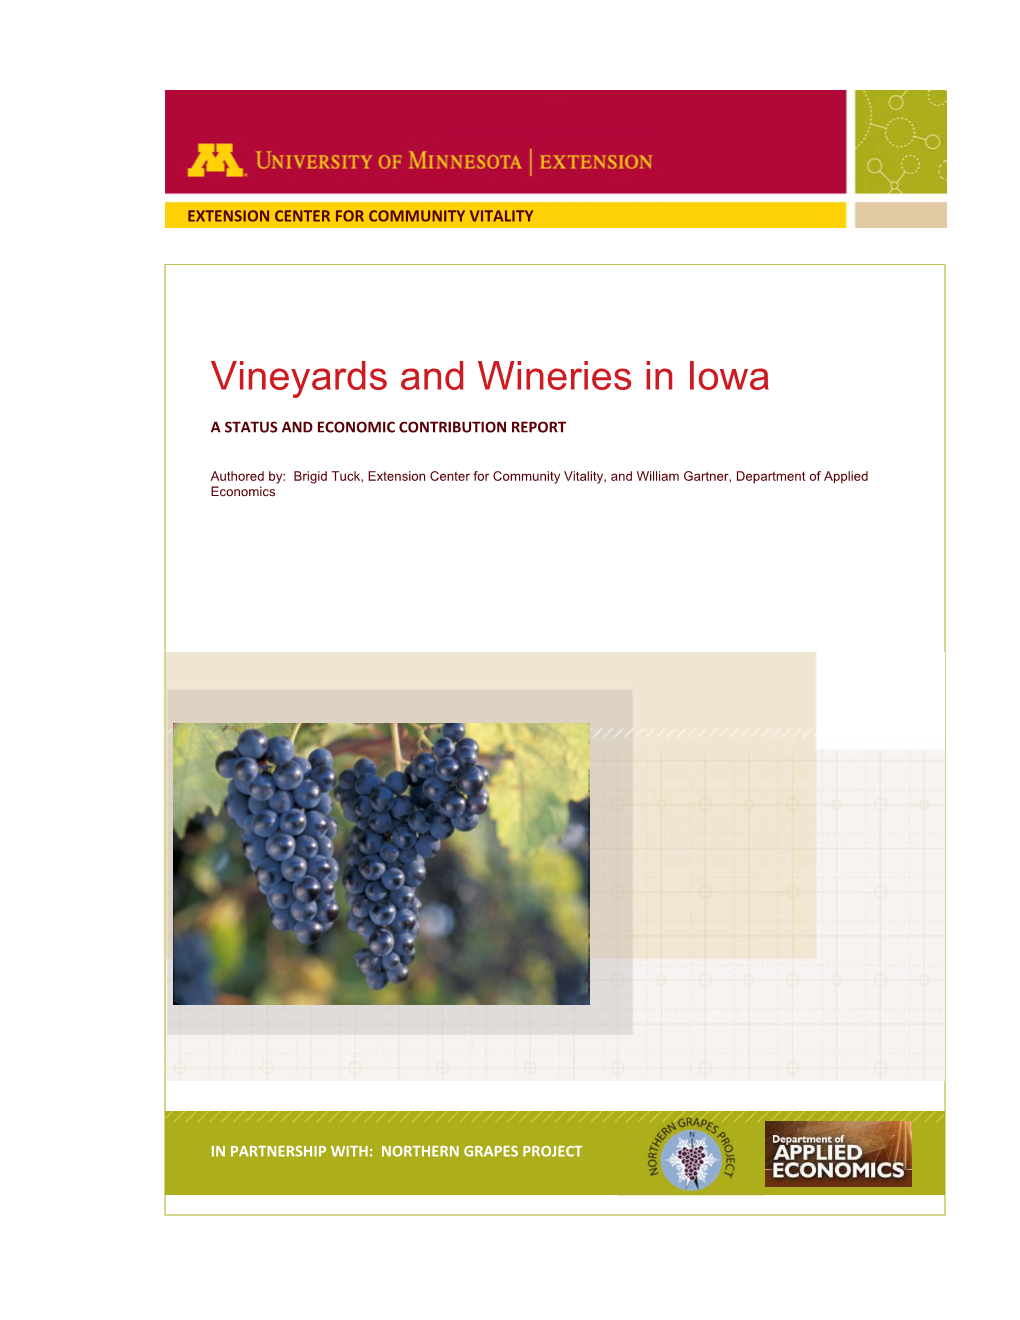 Vineyards and Wineries in Iowa